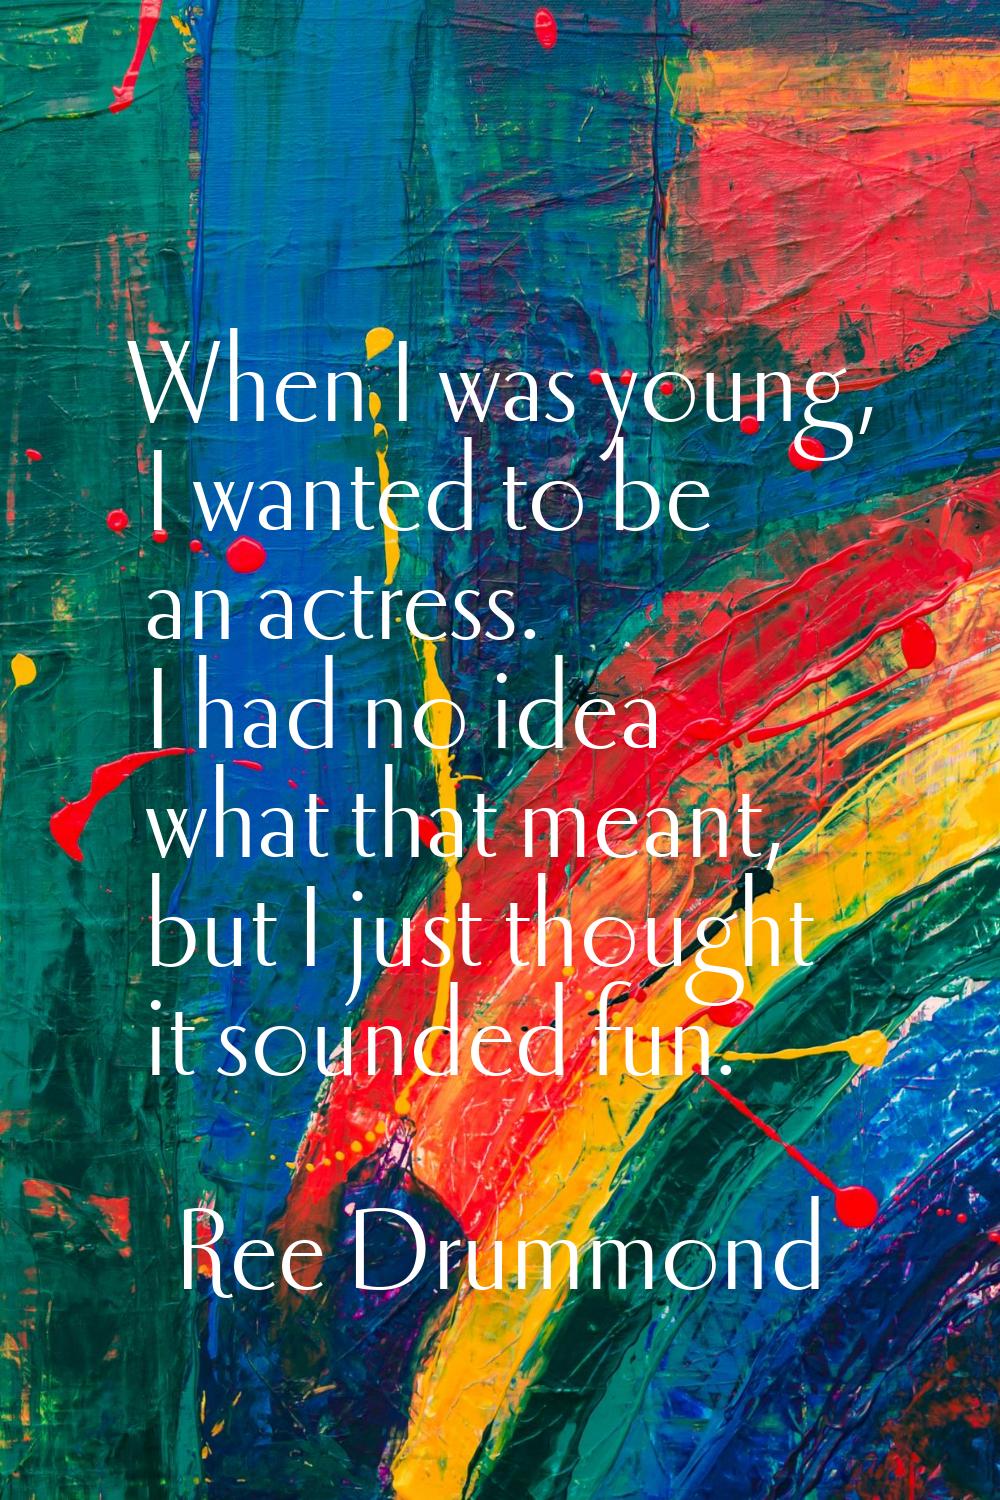 When I was young, I wanted to be an actress. I had no idea what that meant, but I just thought it s